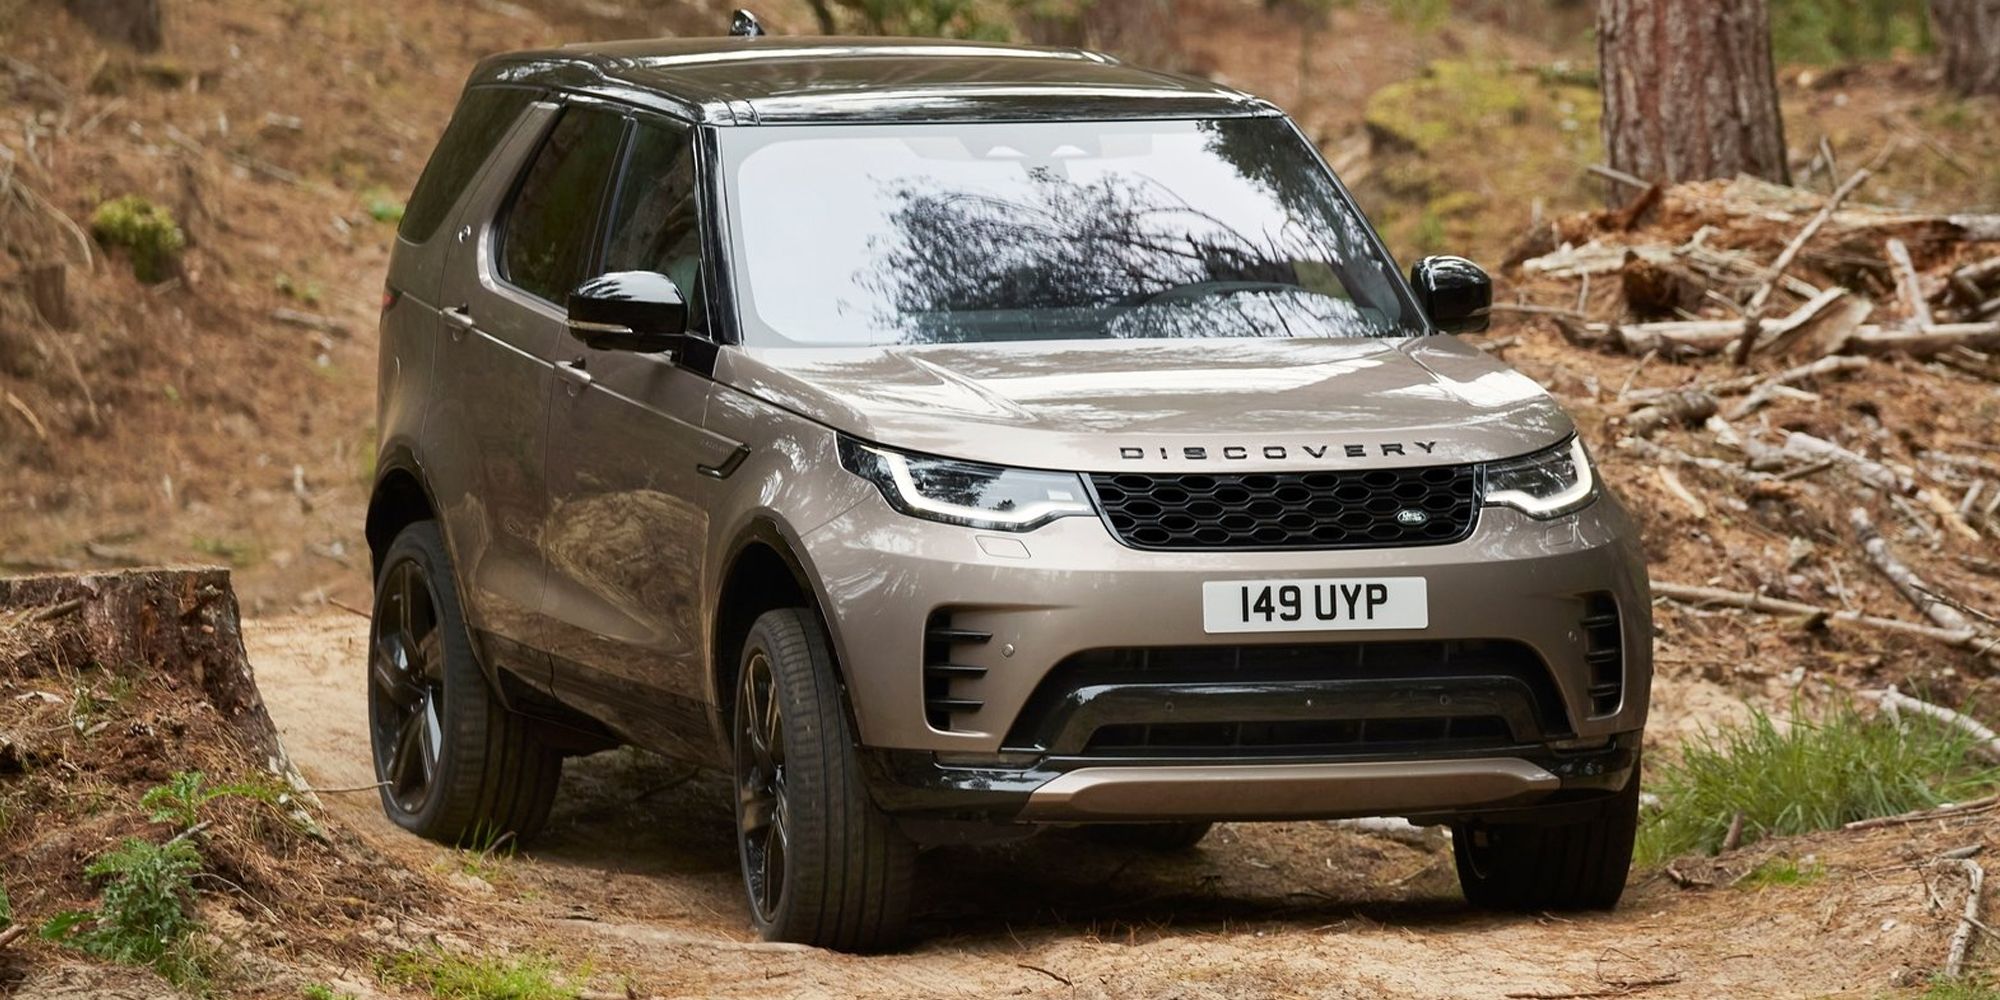 The front of the Discovery off-roading